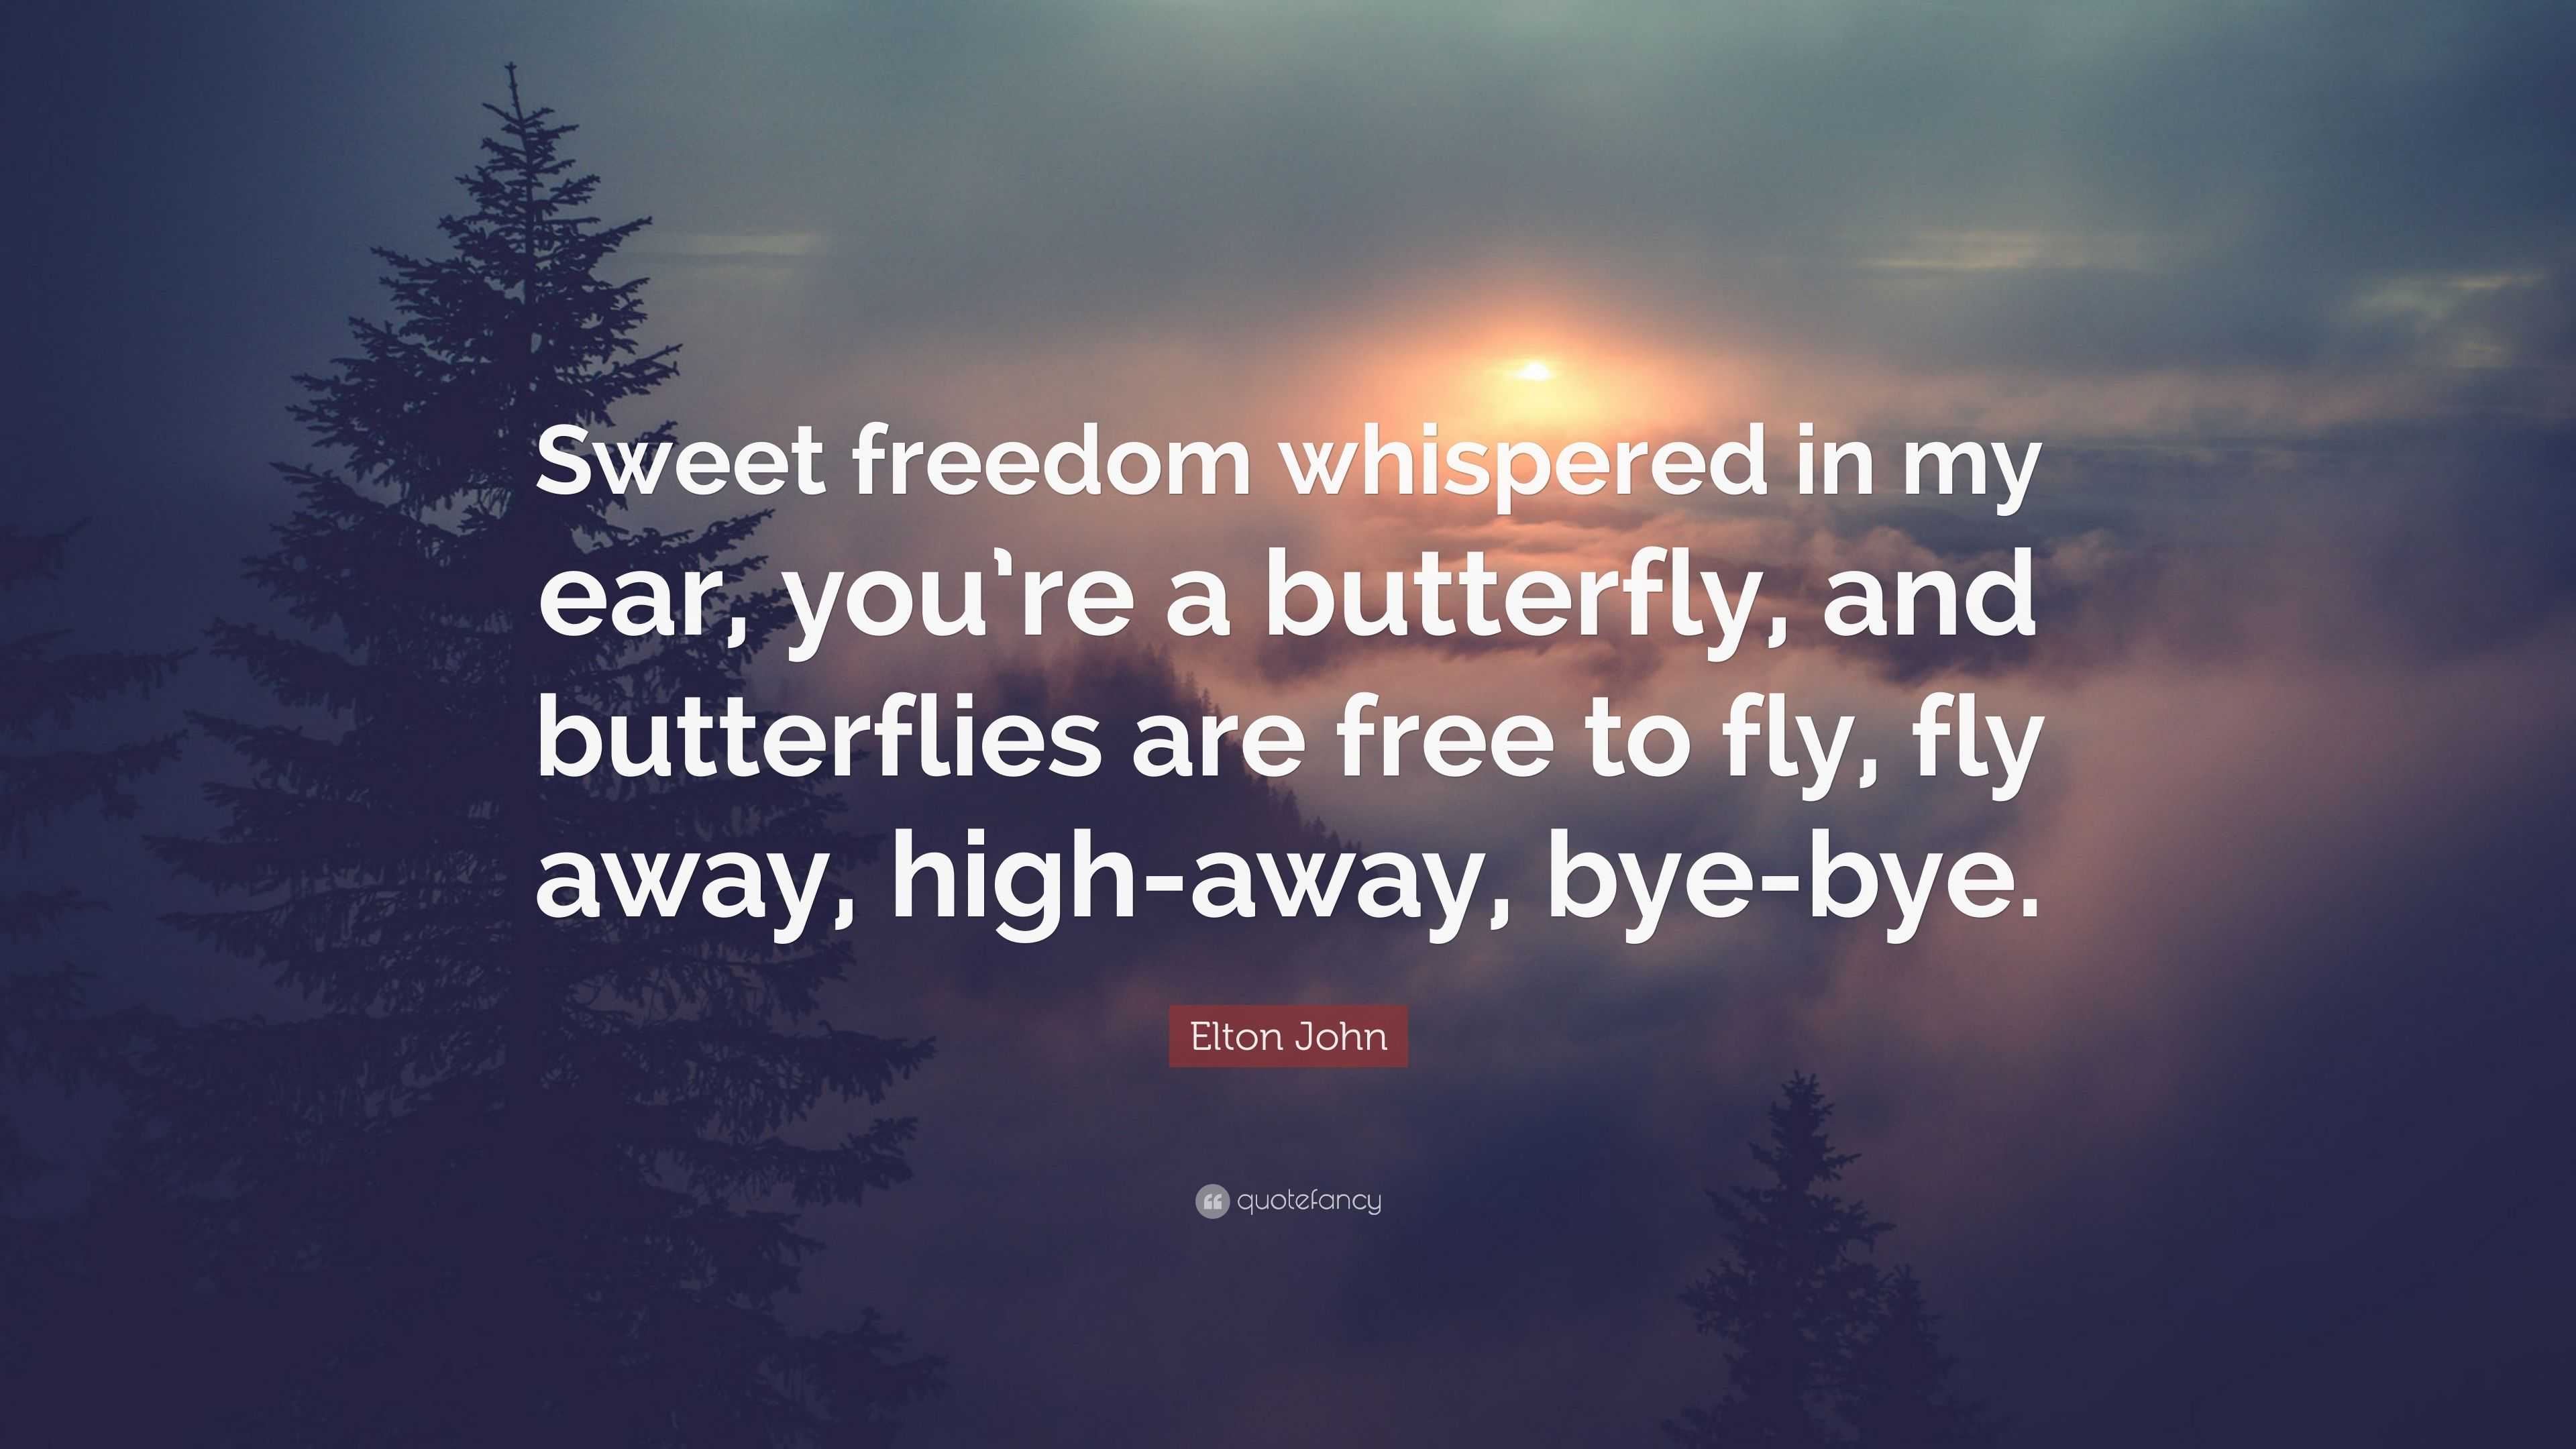 FREEDOM GIVES WINGS SO FLY LIKE BUTTERFLY – Hyde Comfort